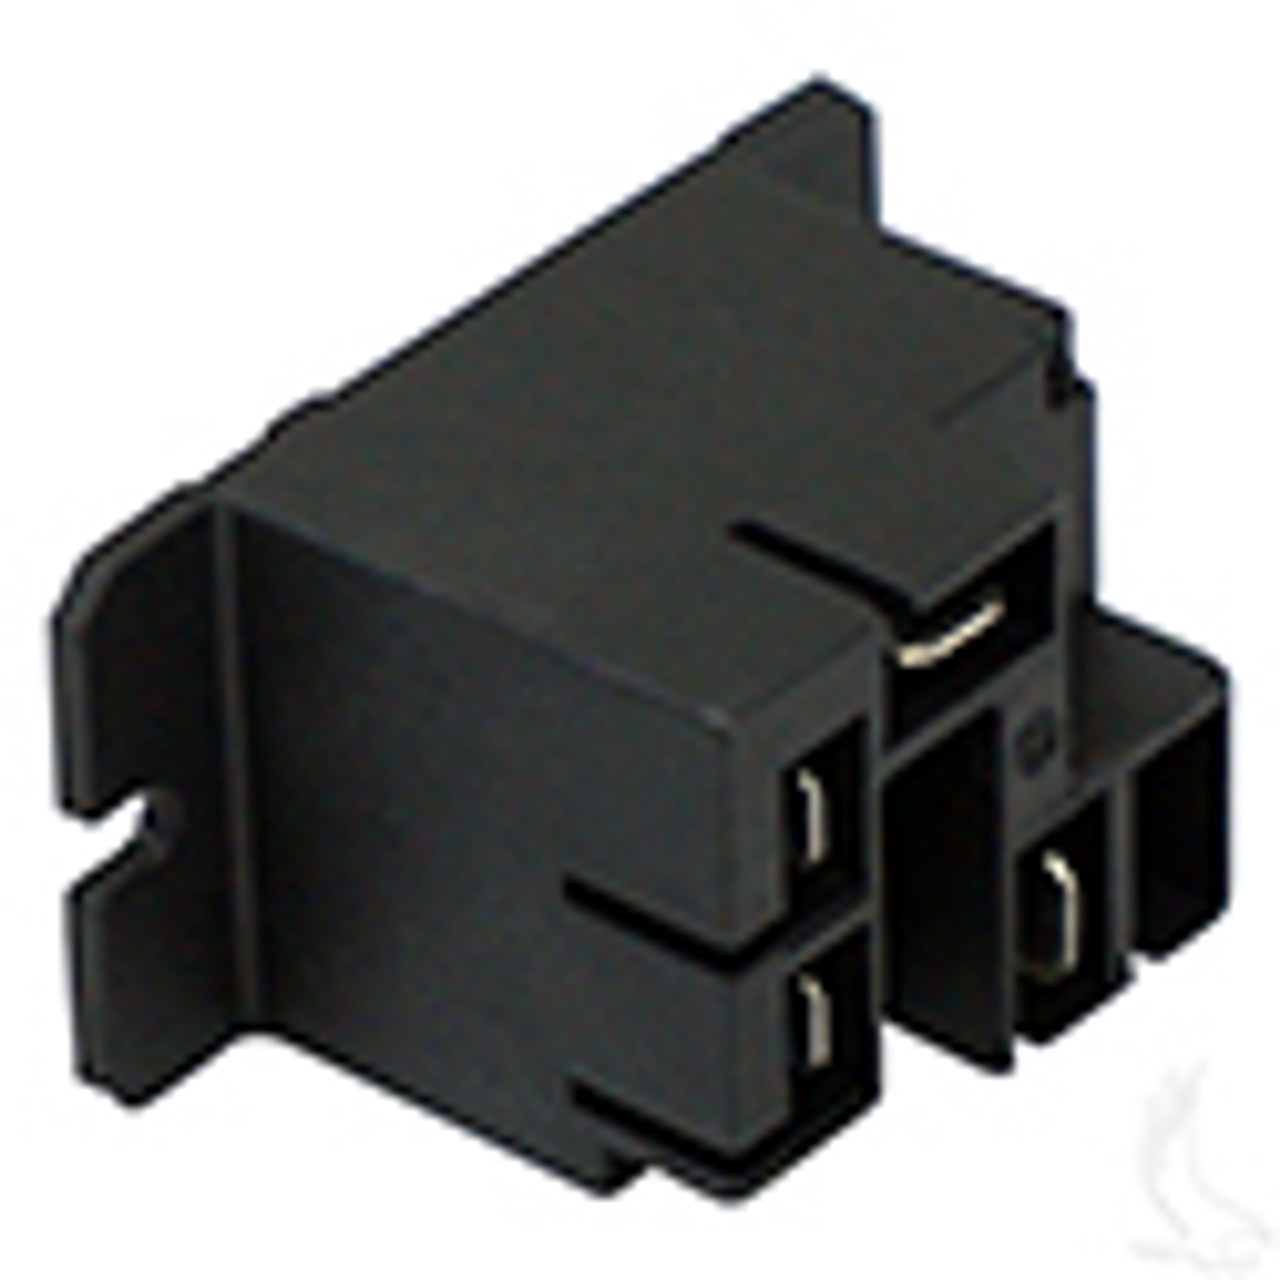 48V Relay for Club Car PowerDrive Chargers 1995-Up, CGR-073, 101828601, 3551, 3551A, 4436. CGR-073